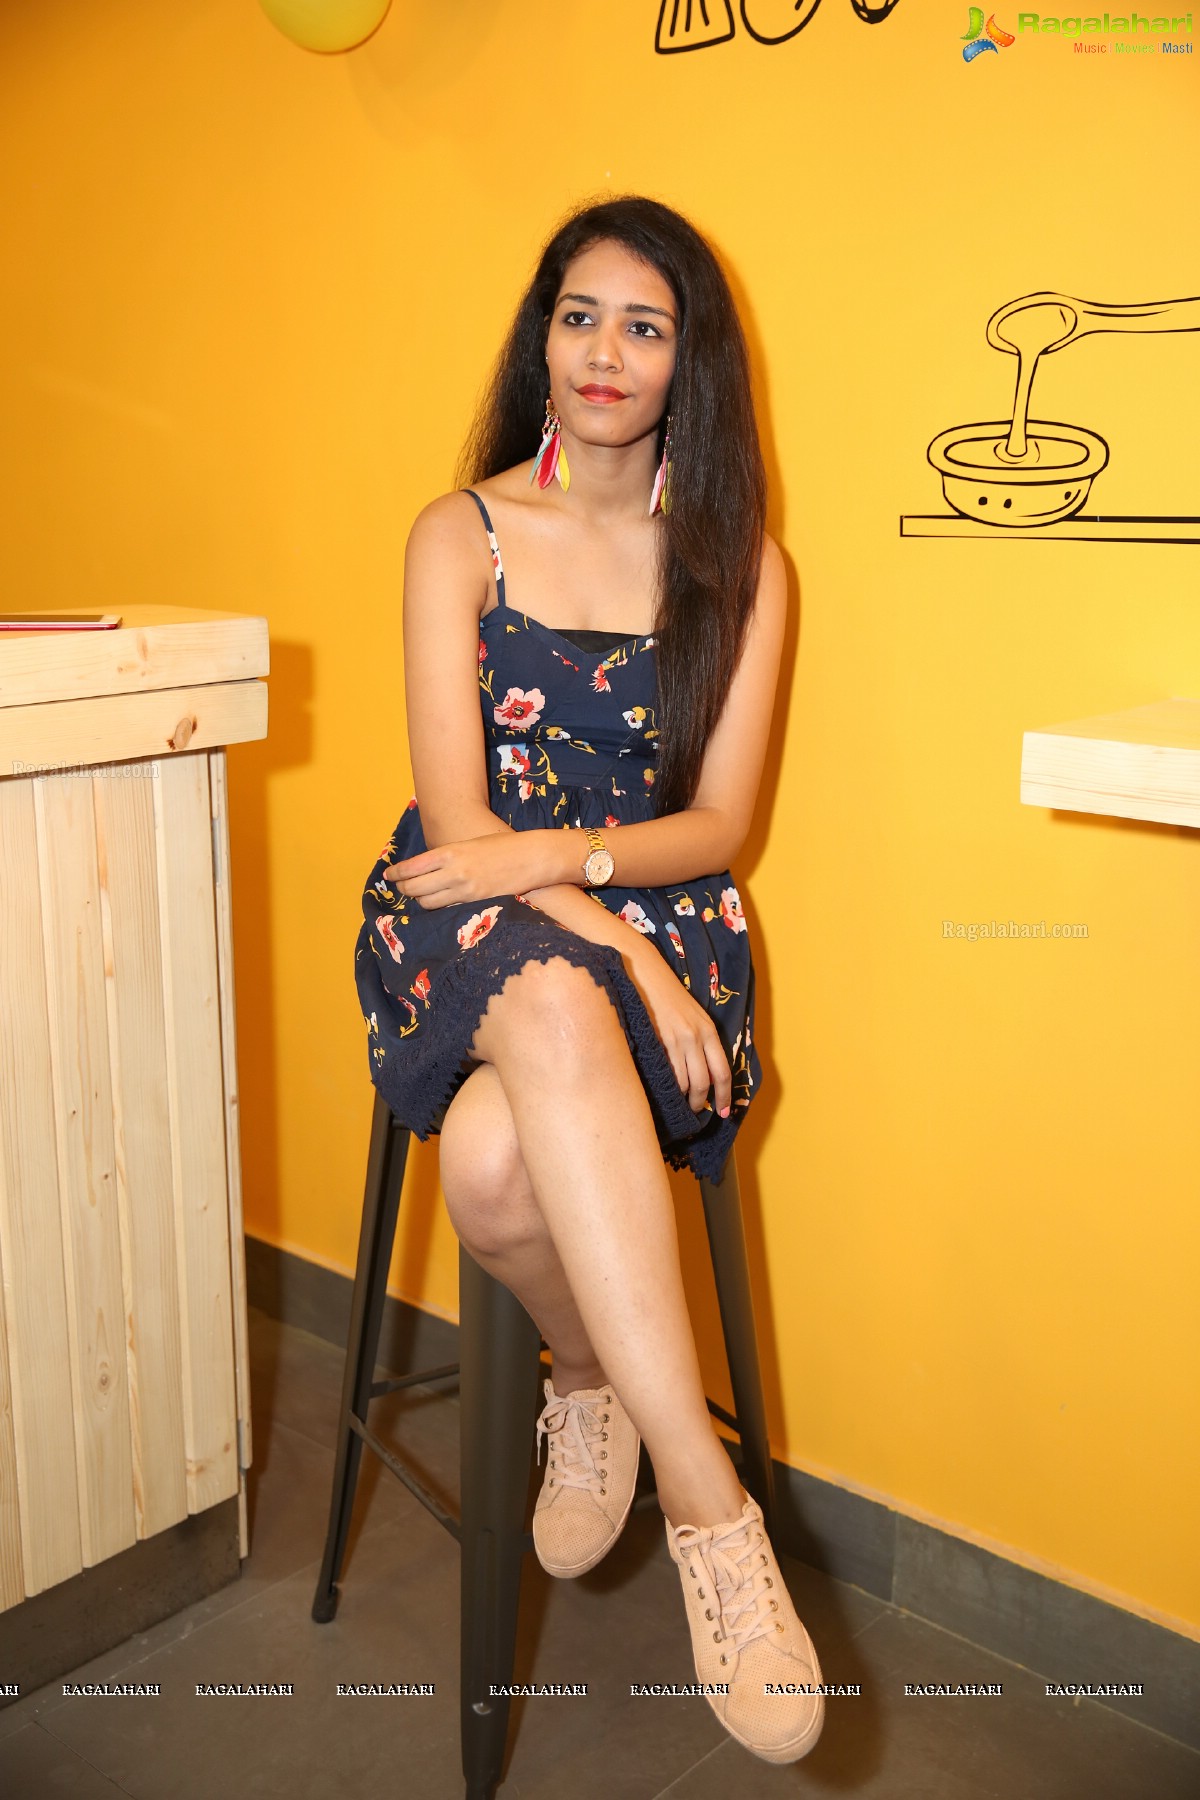 Grand Launch of The Belgian Waffle at Road #36, Jubilee Hills, Hyderabad